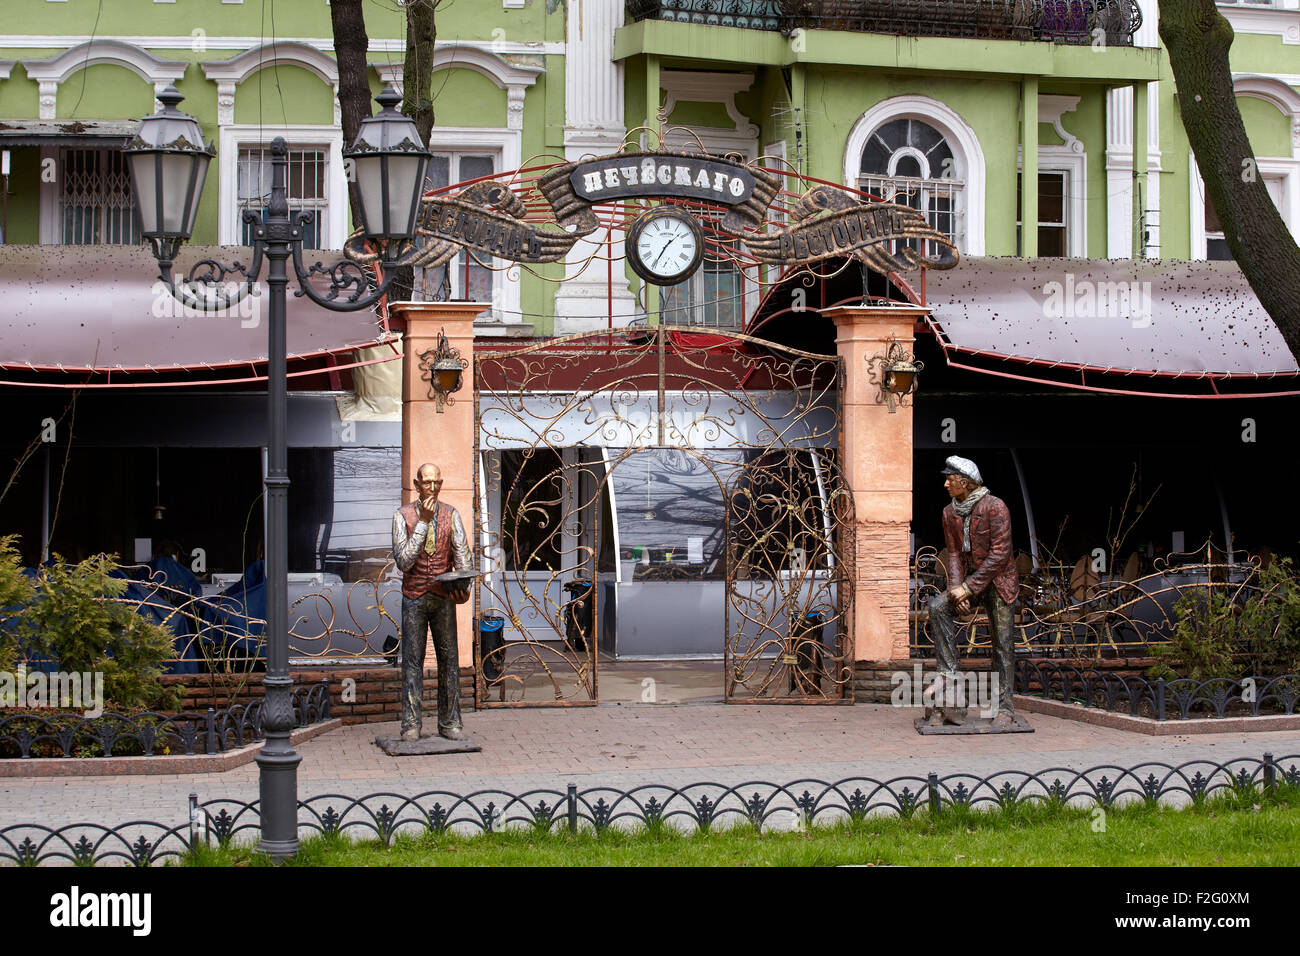 Entrance of a Restaurant in Odessa Stock Photo